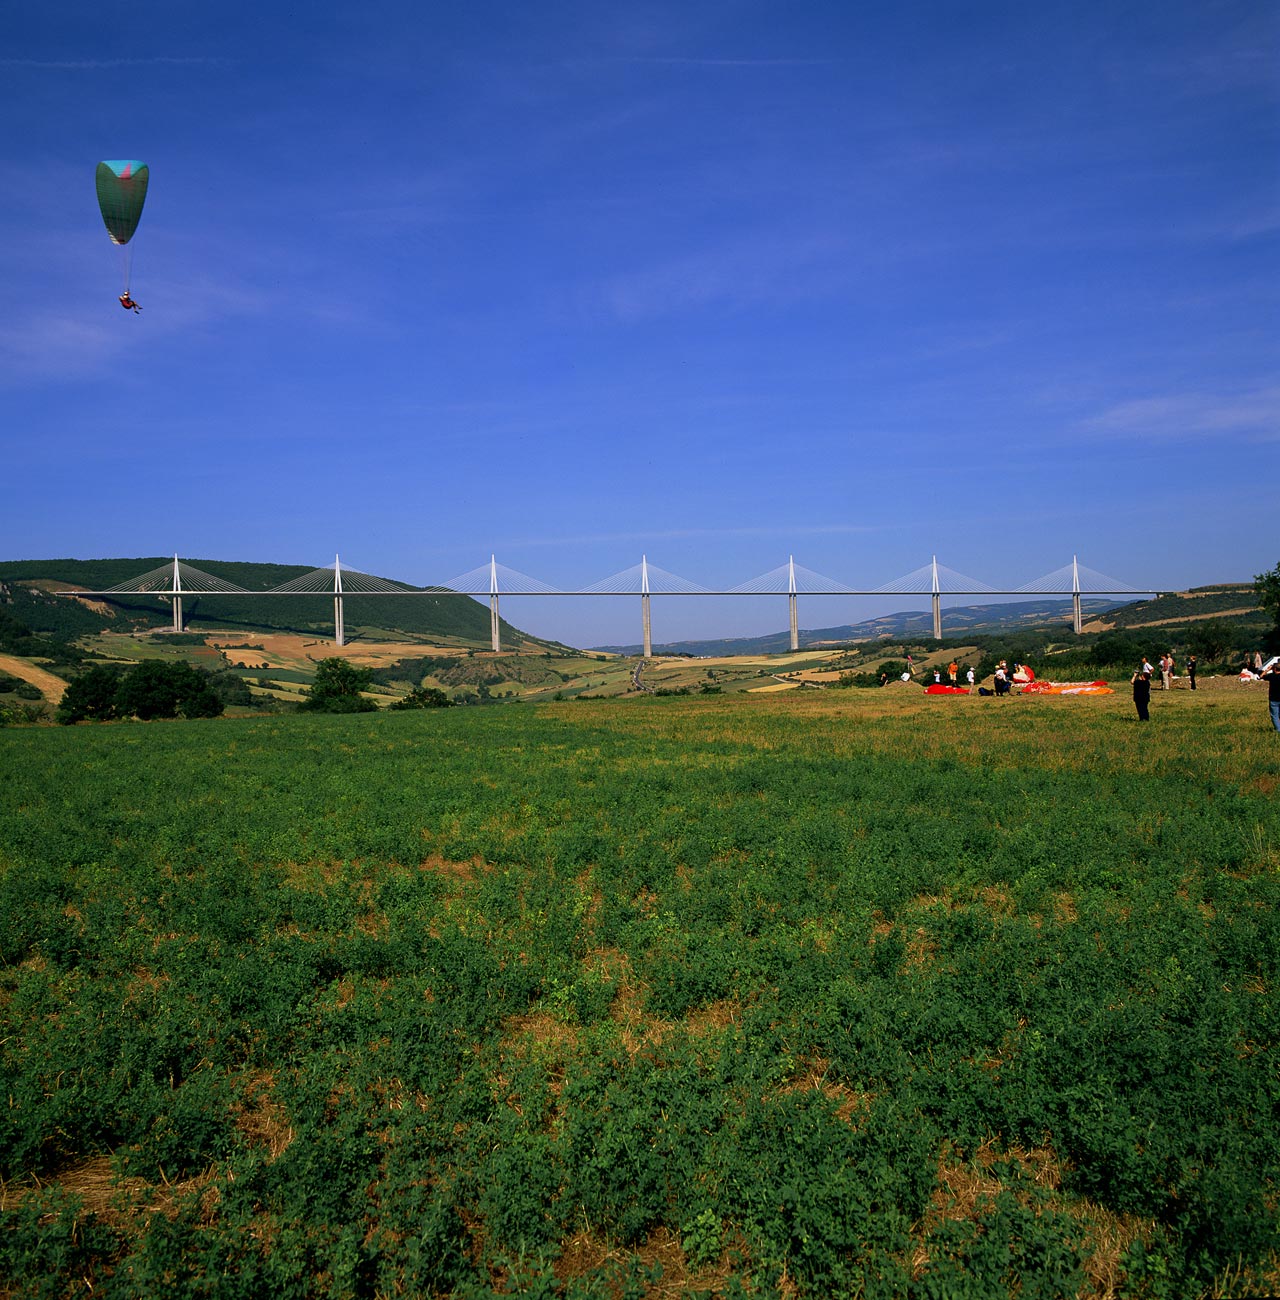 Millau Viaduct Backgrounds on Wallpapers Vista